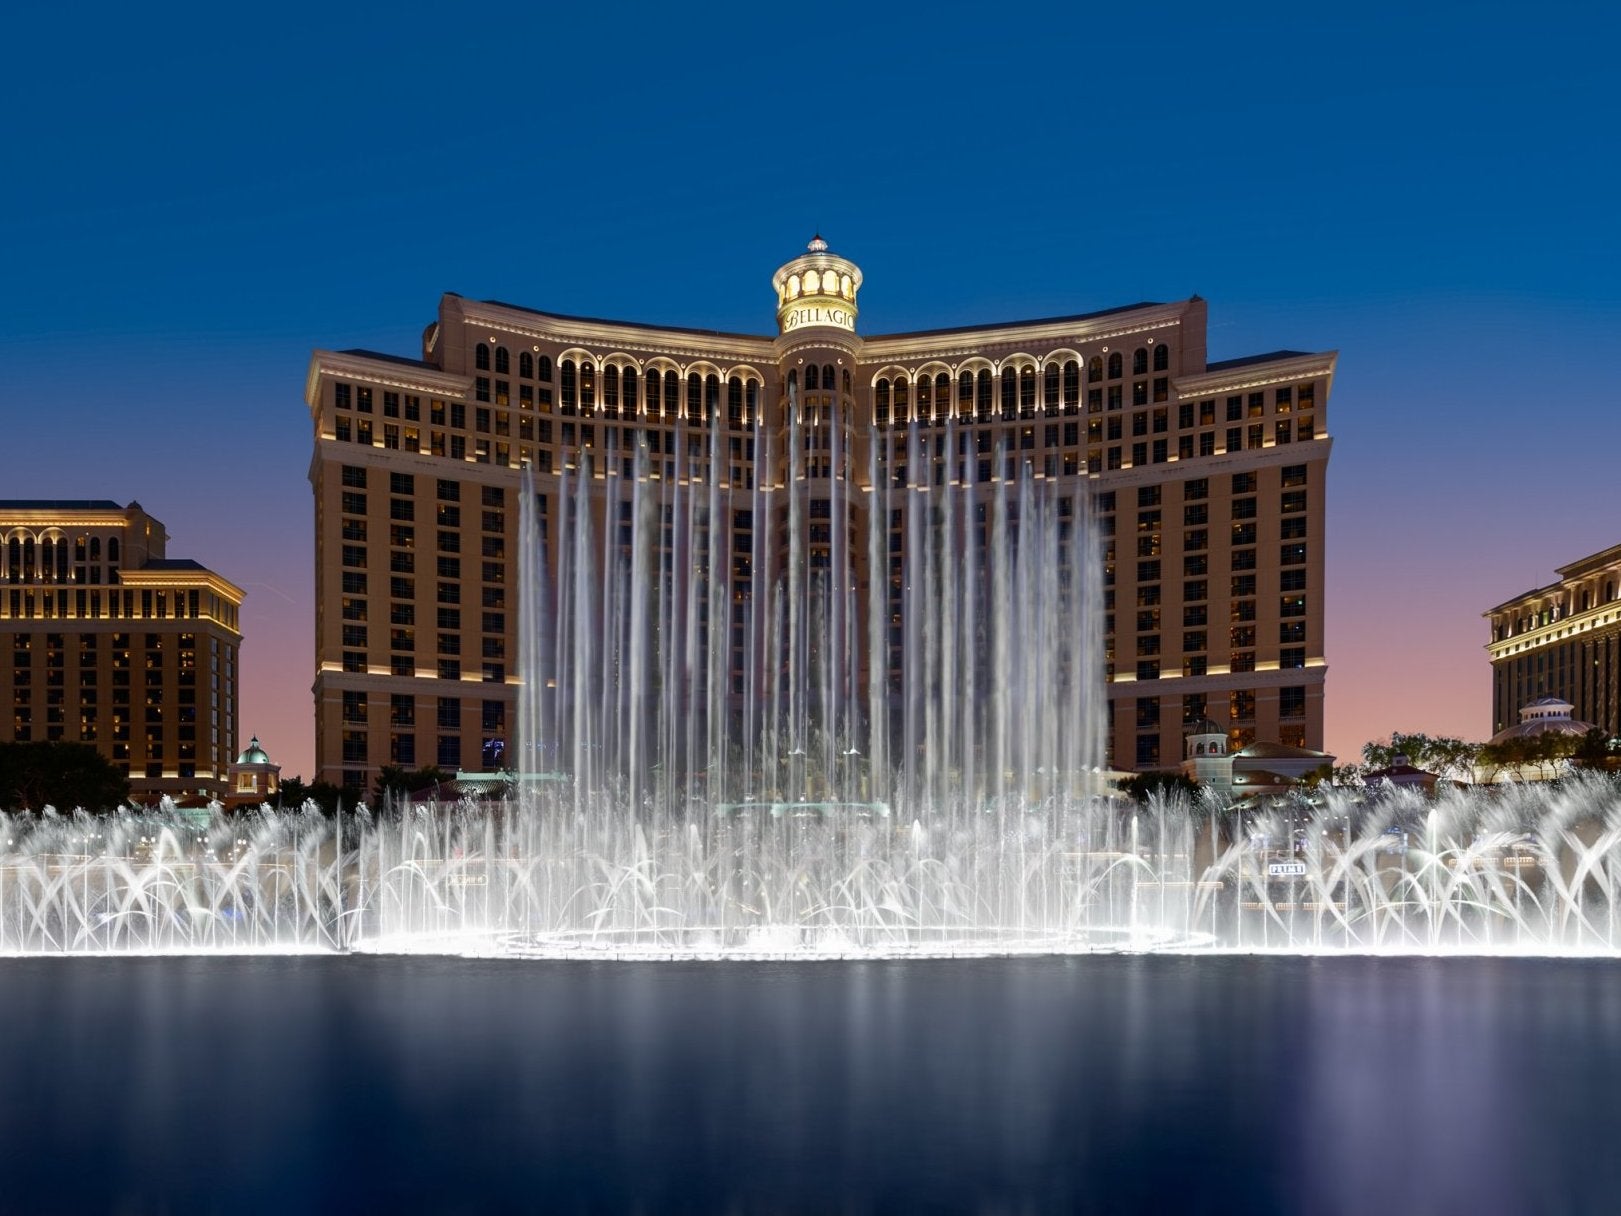 The Bellagio charges extra fees of up to $40 per night